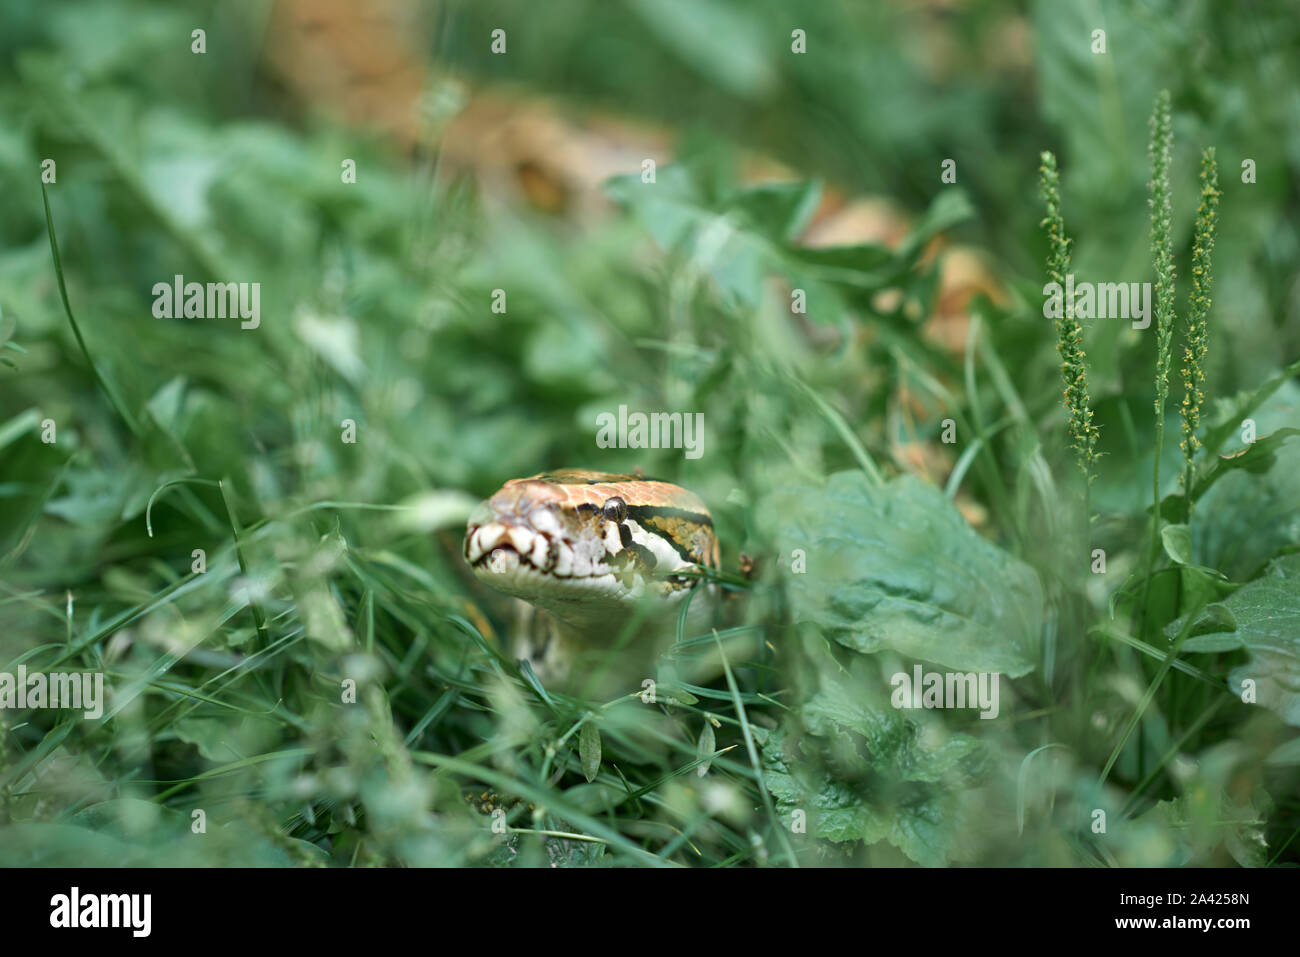 Scary phyton creeping. Creepy snake lying in meadow and greenery of garden. Stock Photo